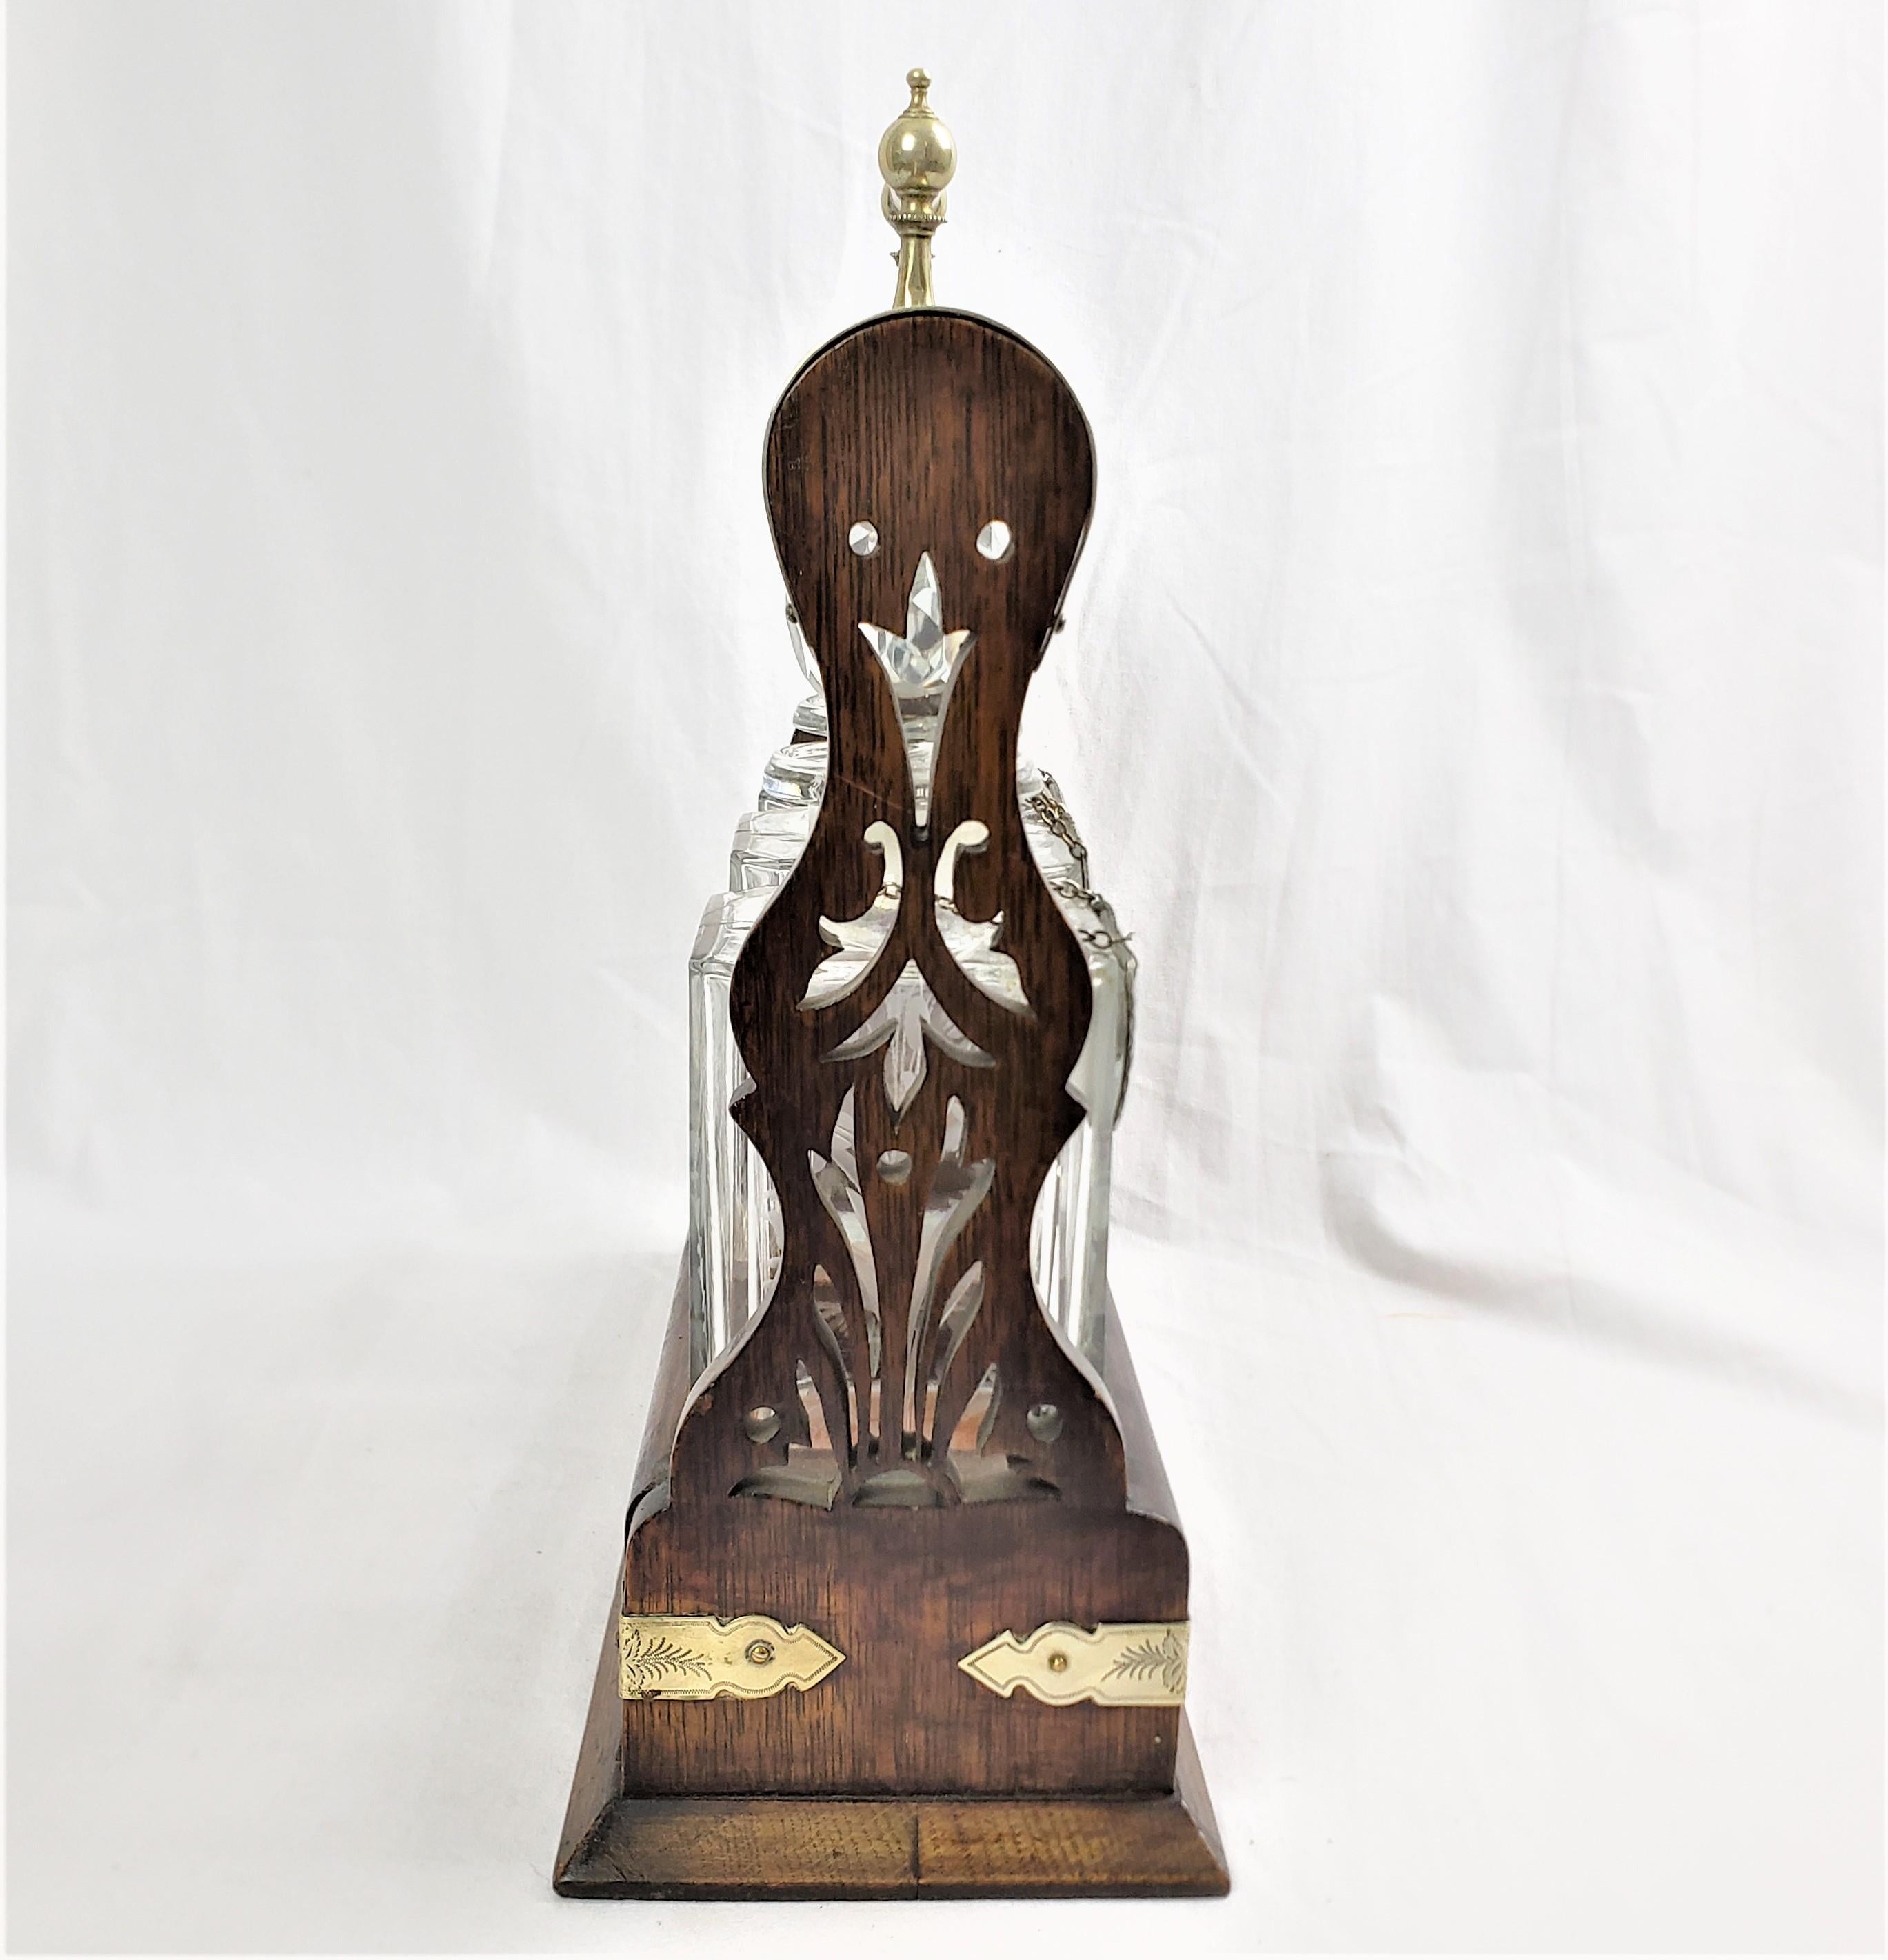 Antique English Three Bottle Oak Tantalus with Etched Floral & Engraved Accents In Good Condition For Sale In Hamilton, Ontario